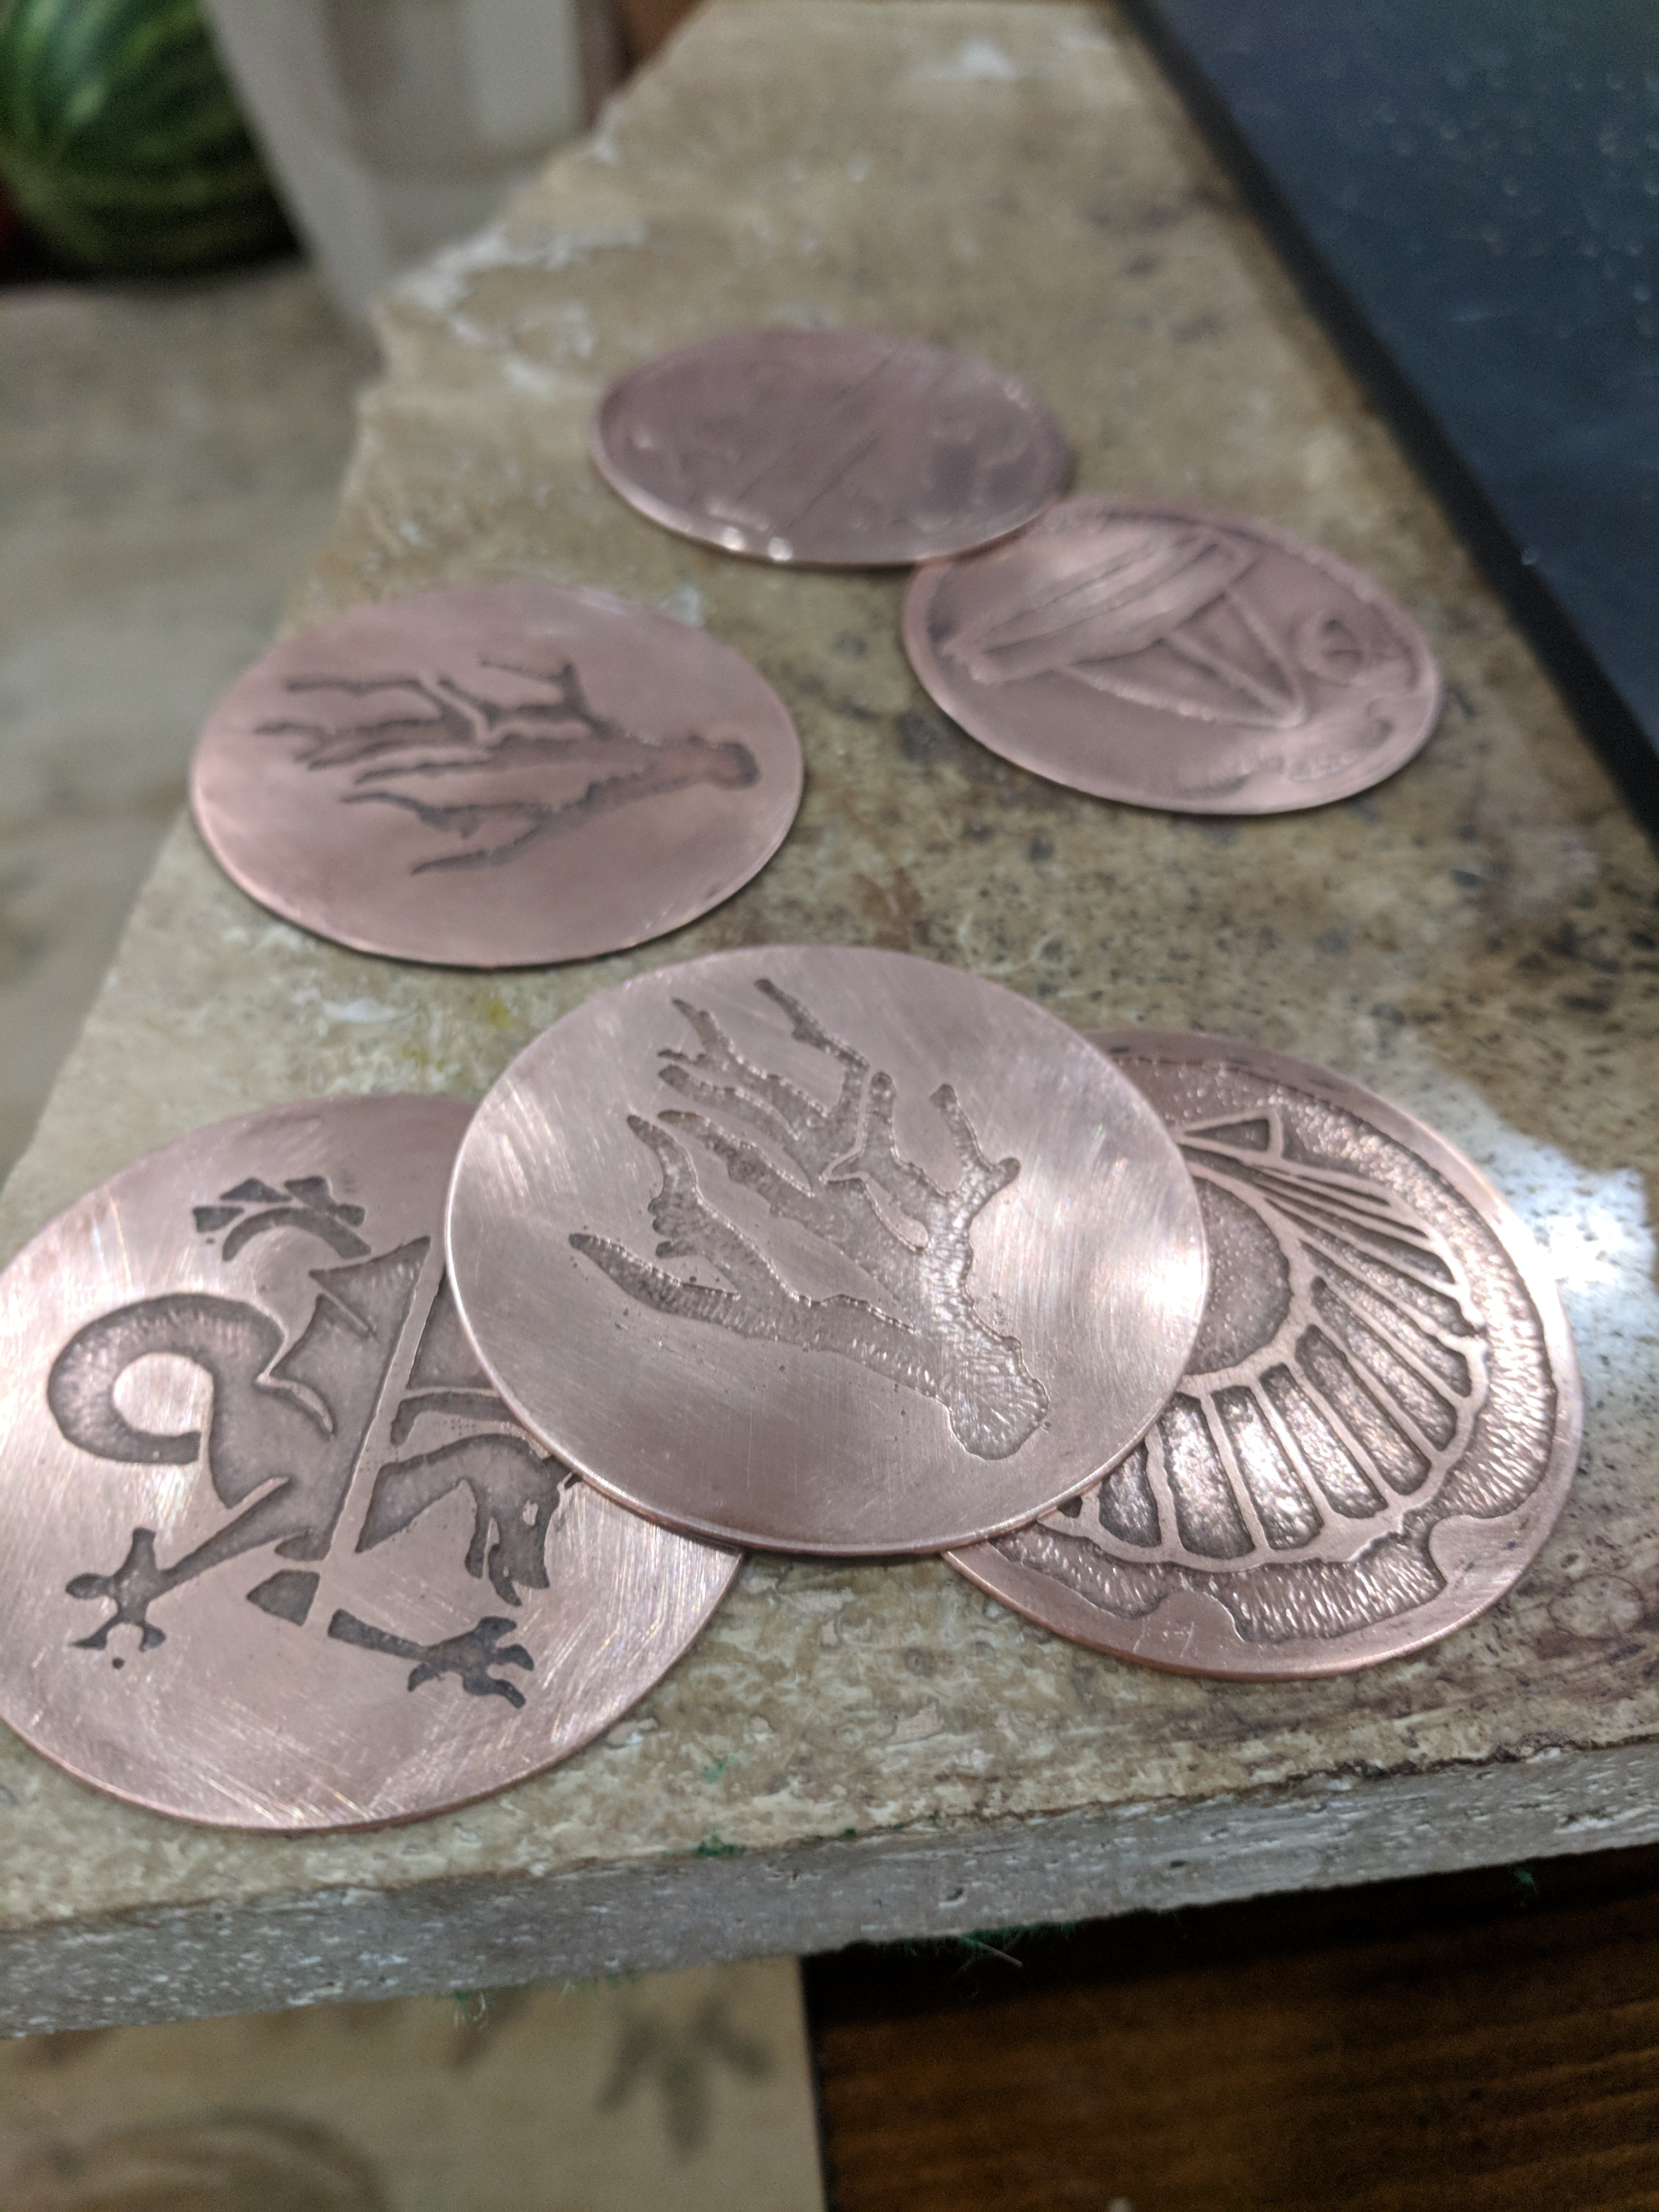 Copper disks after etching and cleaned up before packing